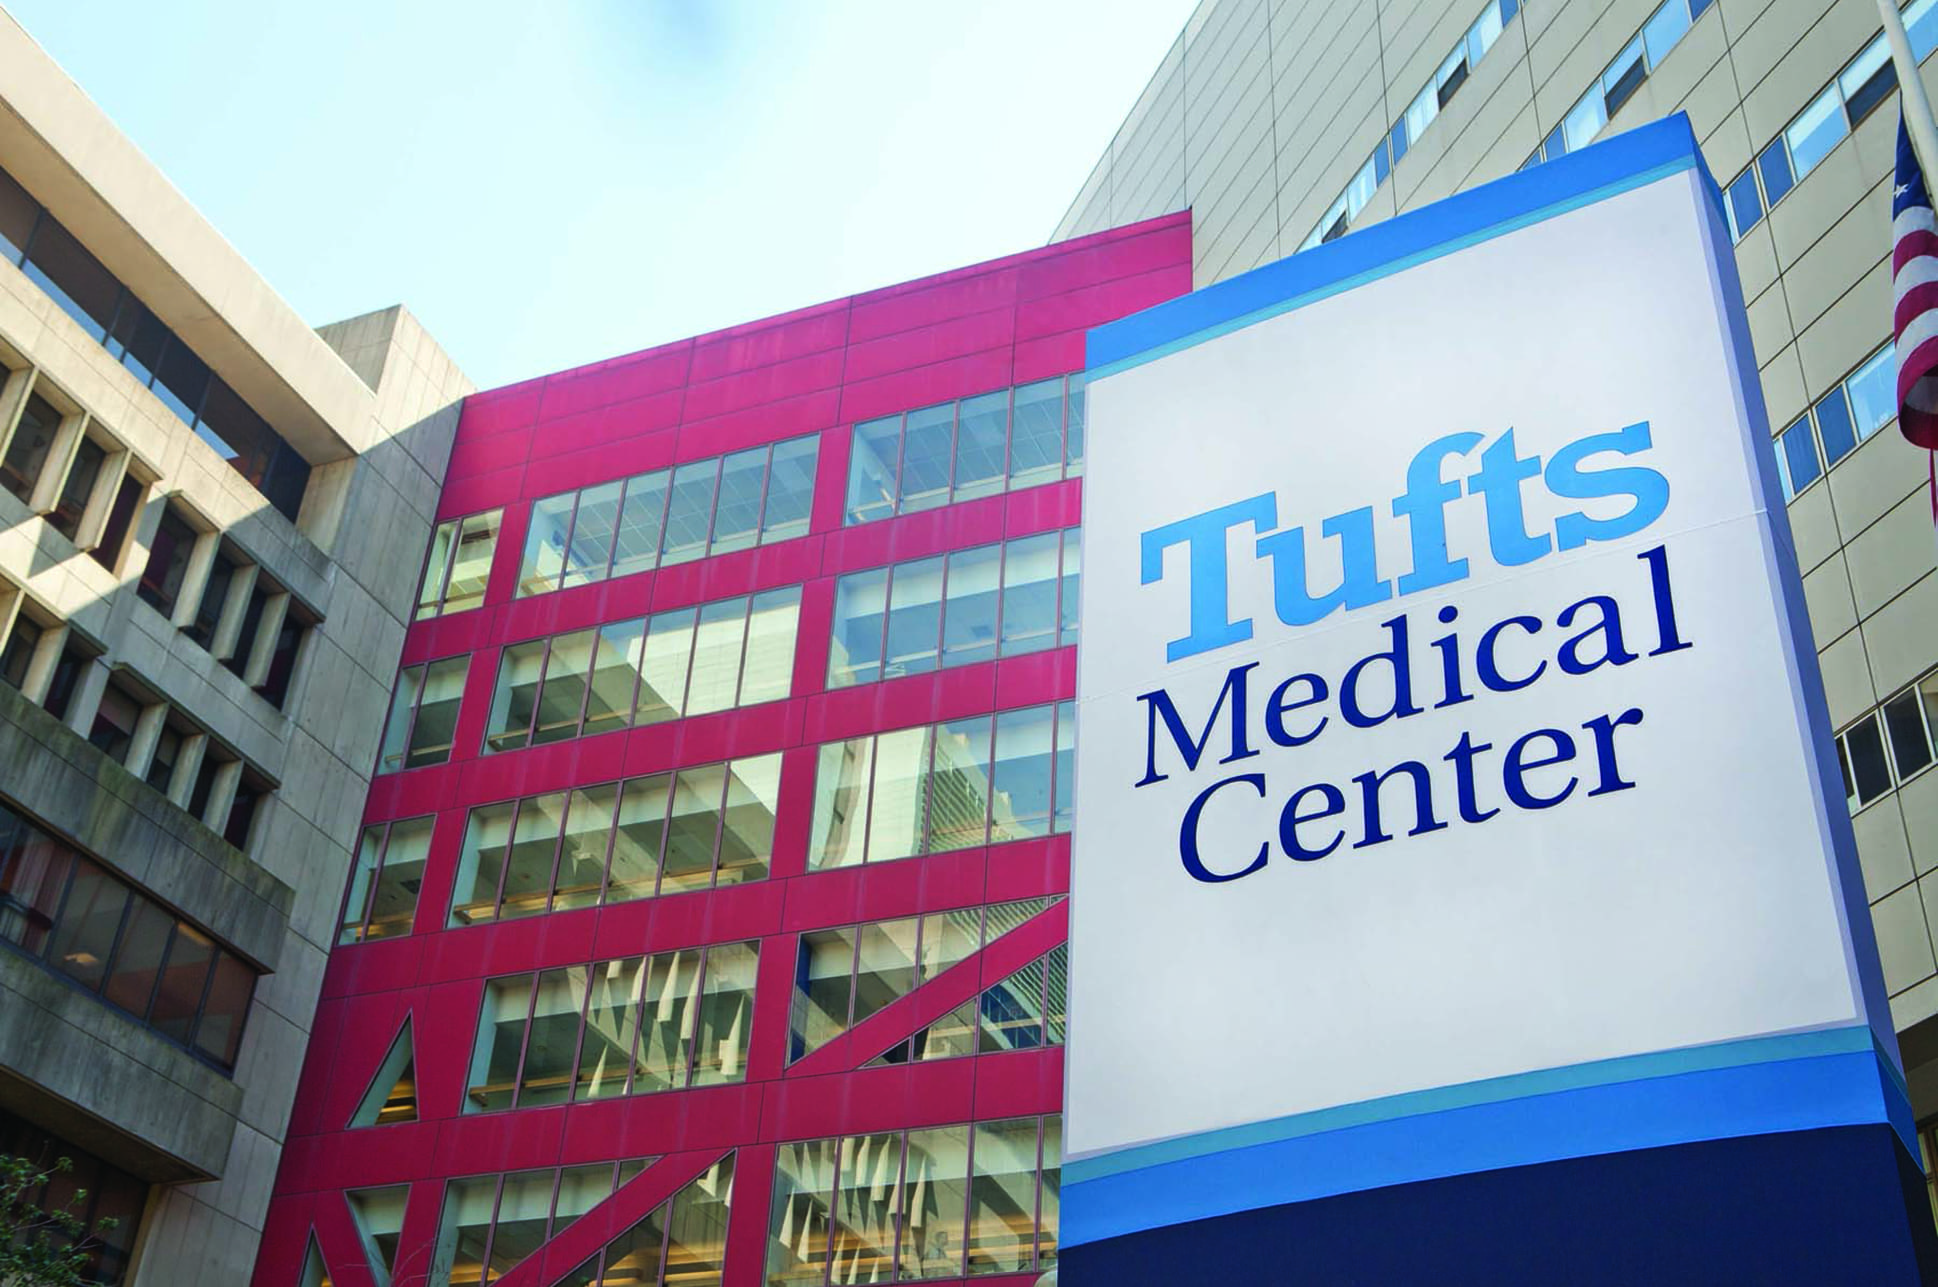 Exterior of the Tufts Medical Center building.